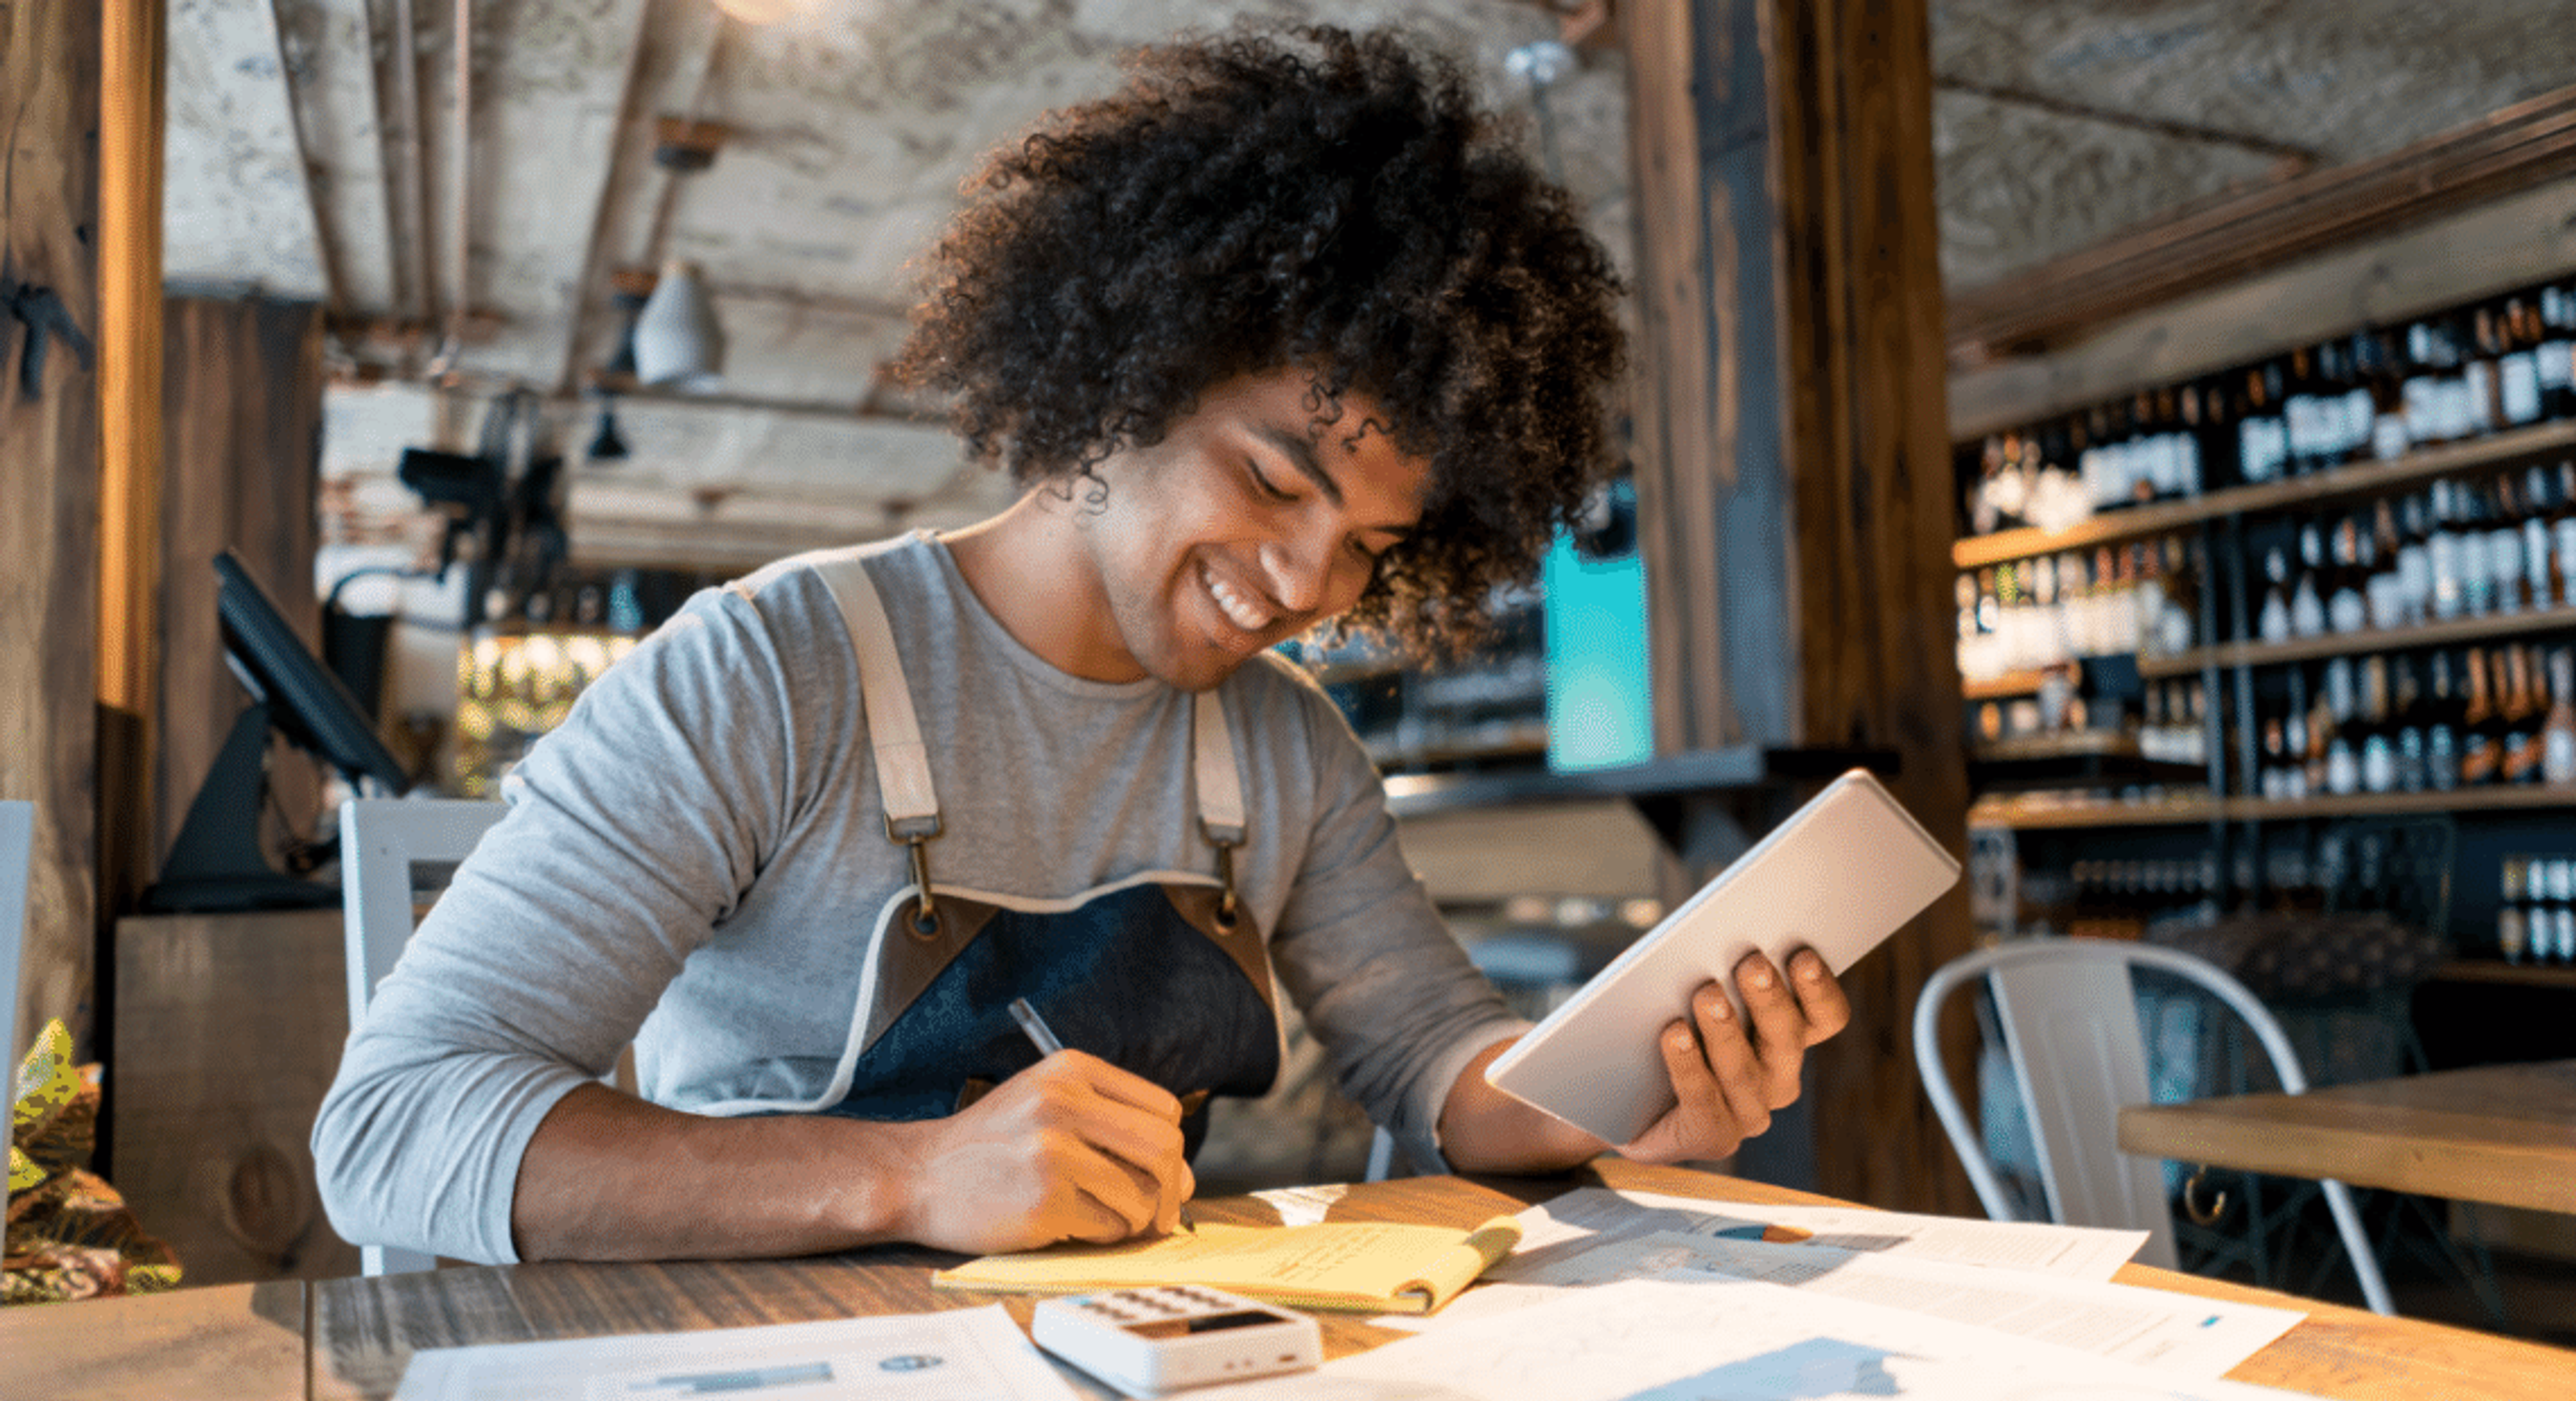 Small Business Bookkeeping: 8 Tips For Every Business Owner